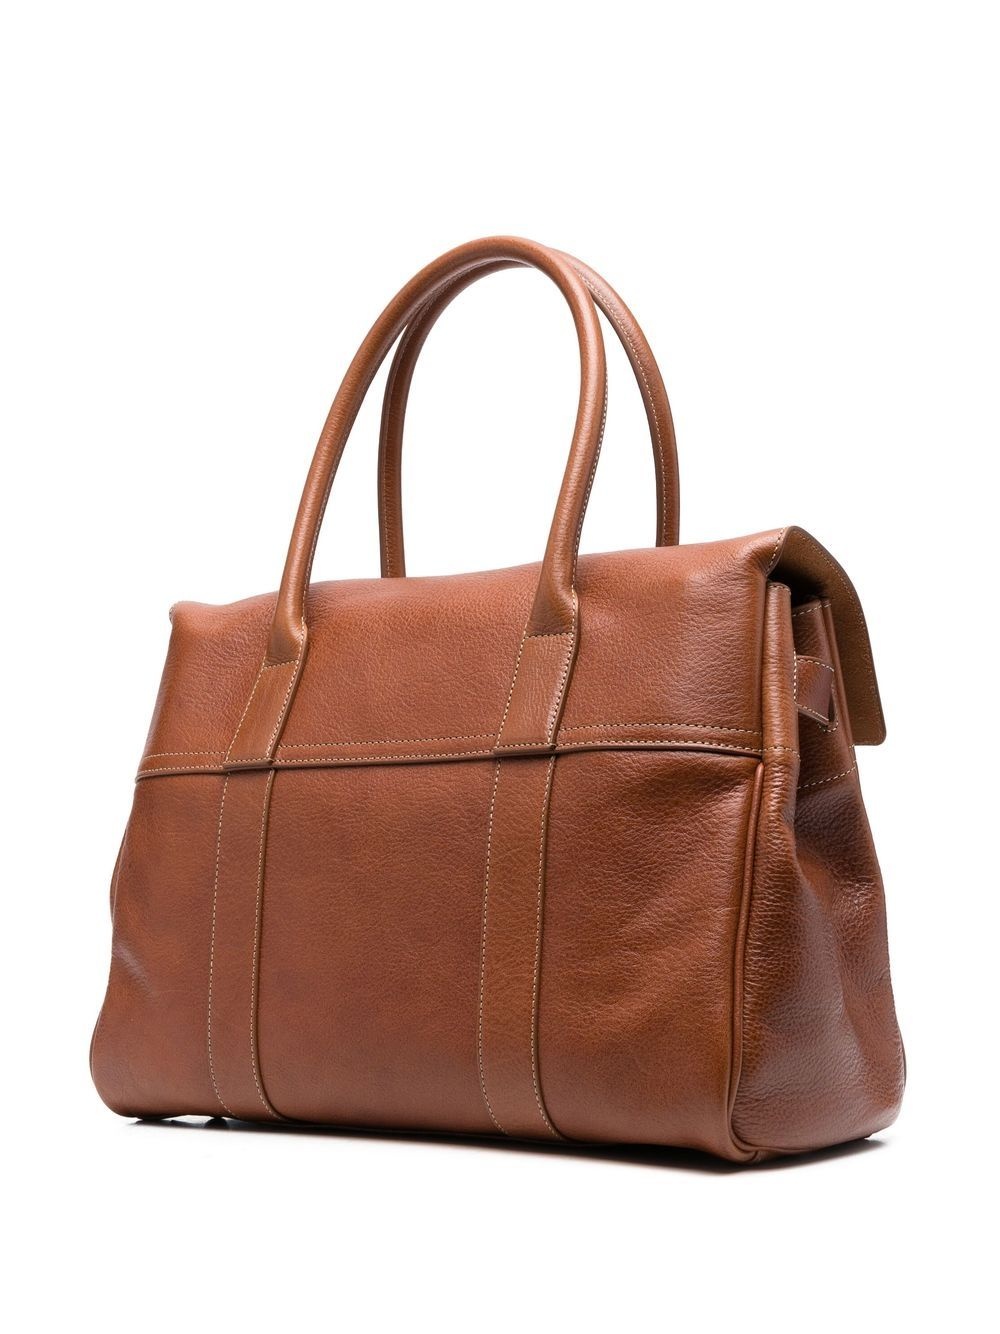 Bayswater leather tote bag - 4